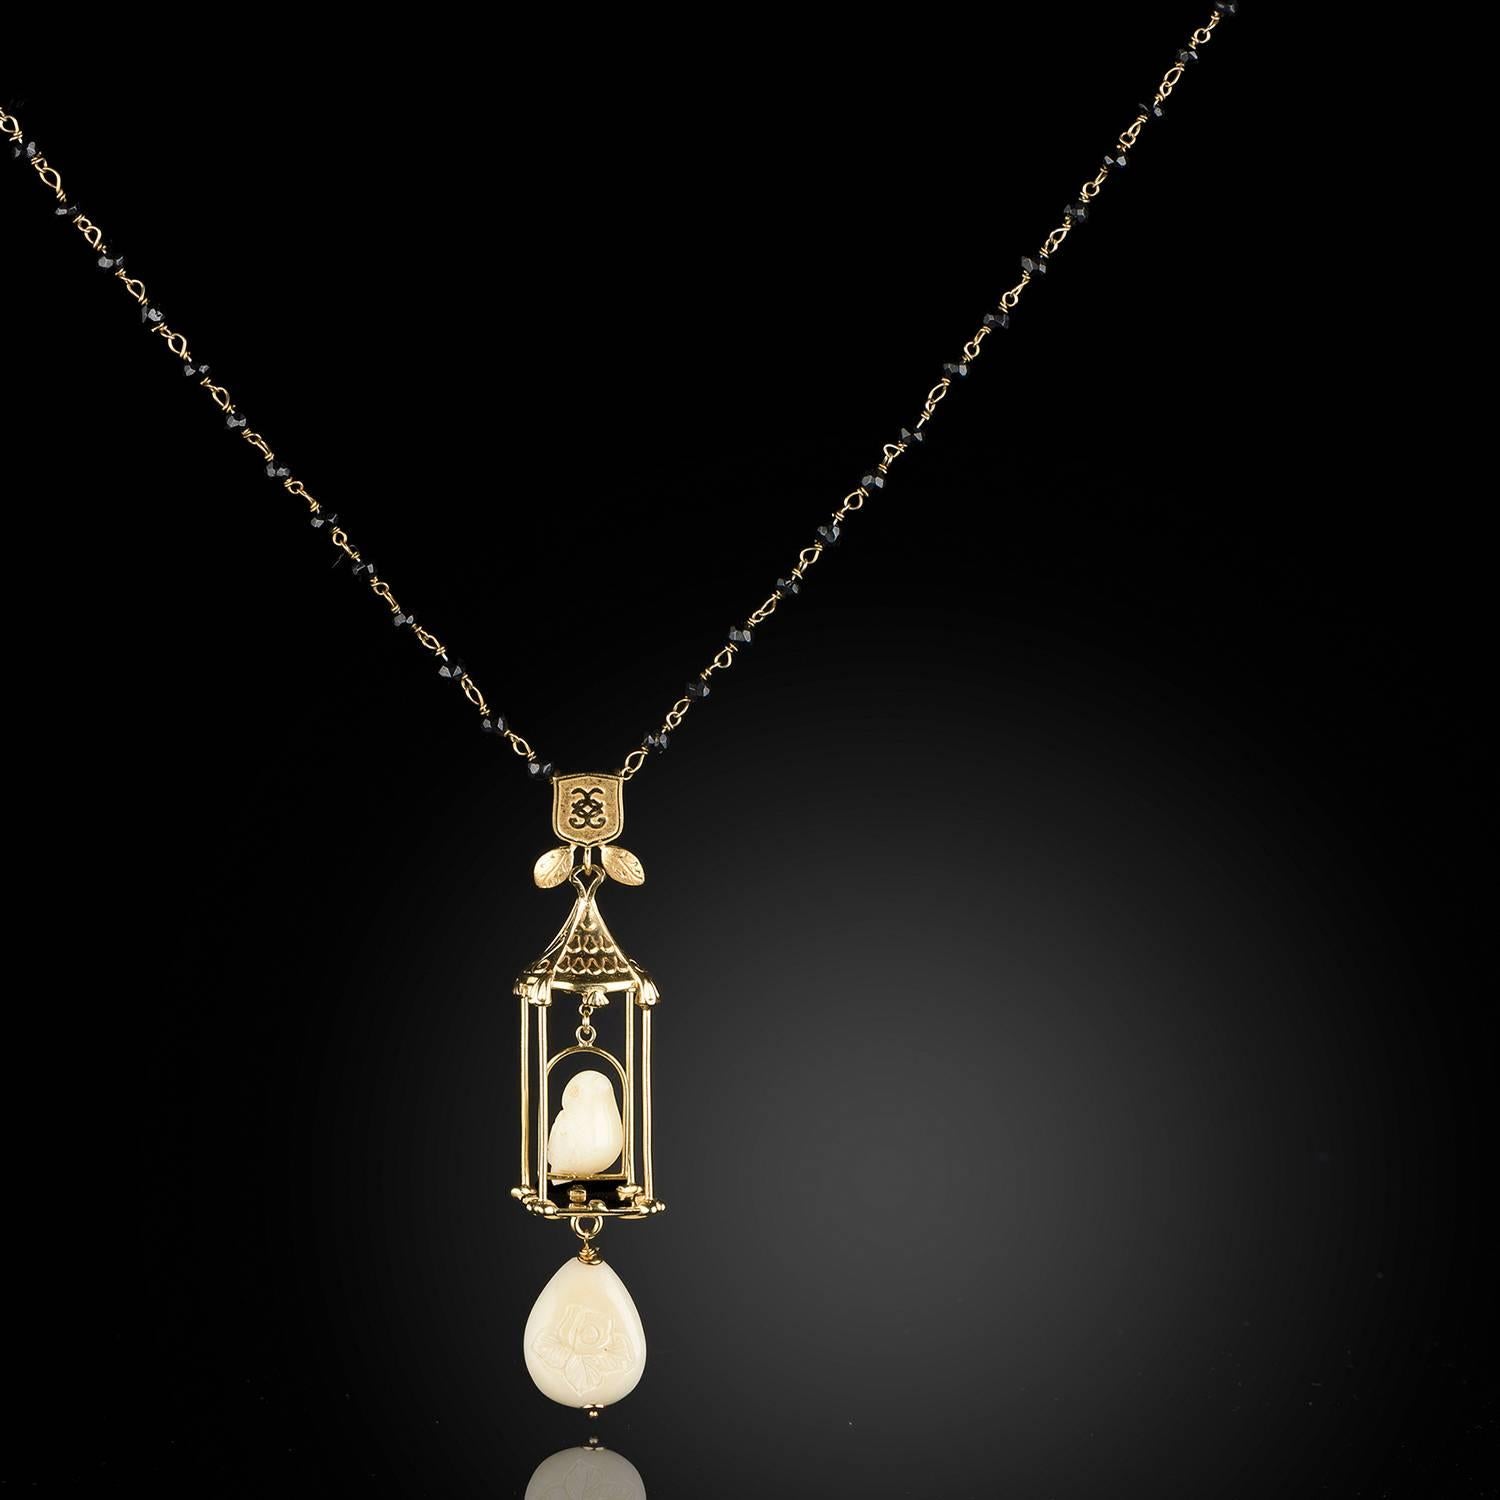 Vermeil and onyx link to make this distinctive necklace. The piece is capped by a pure white bird perched in a gilded cage hanging below a CdG shield. 

The carved material which resembles ivory in our jewelry is Nuvory™, the nut of the South